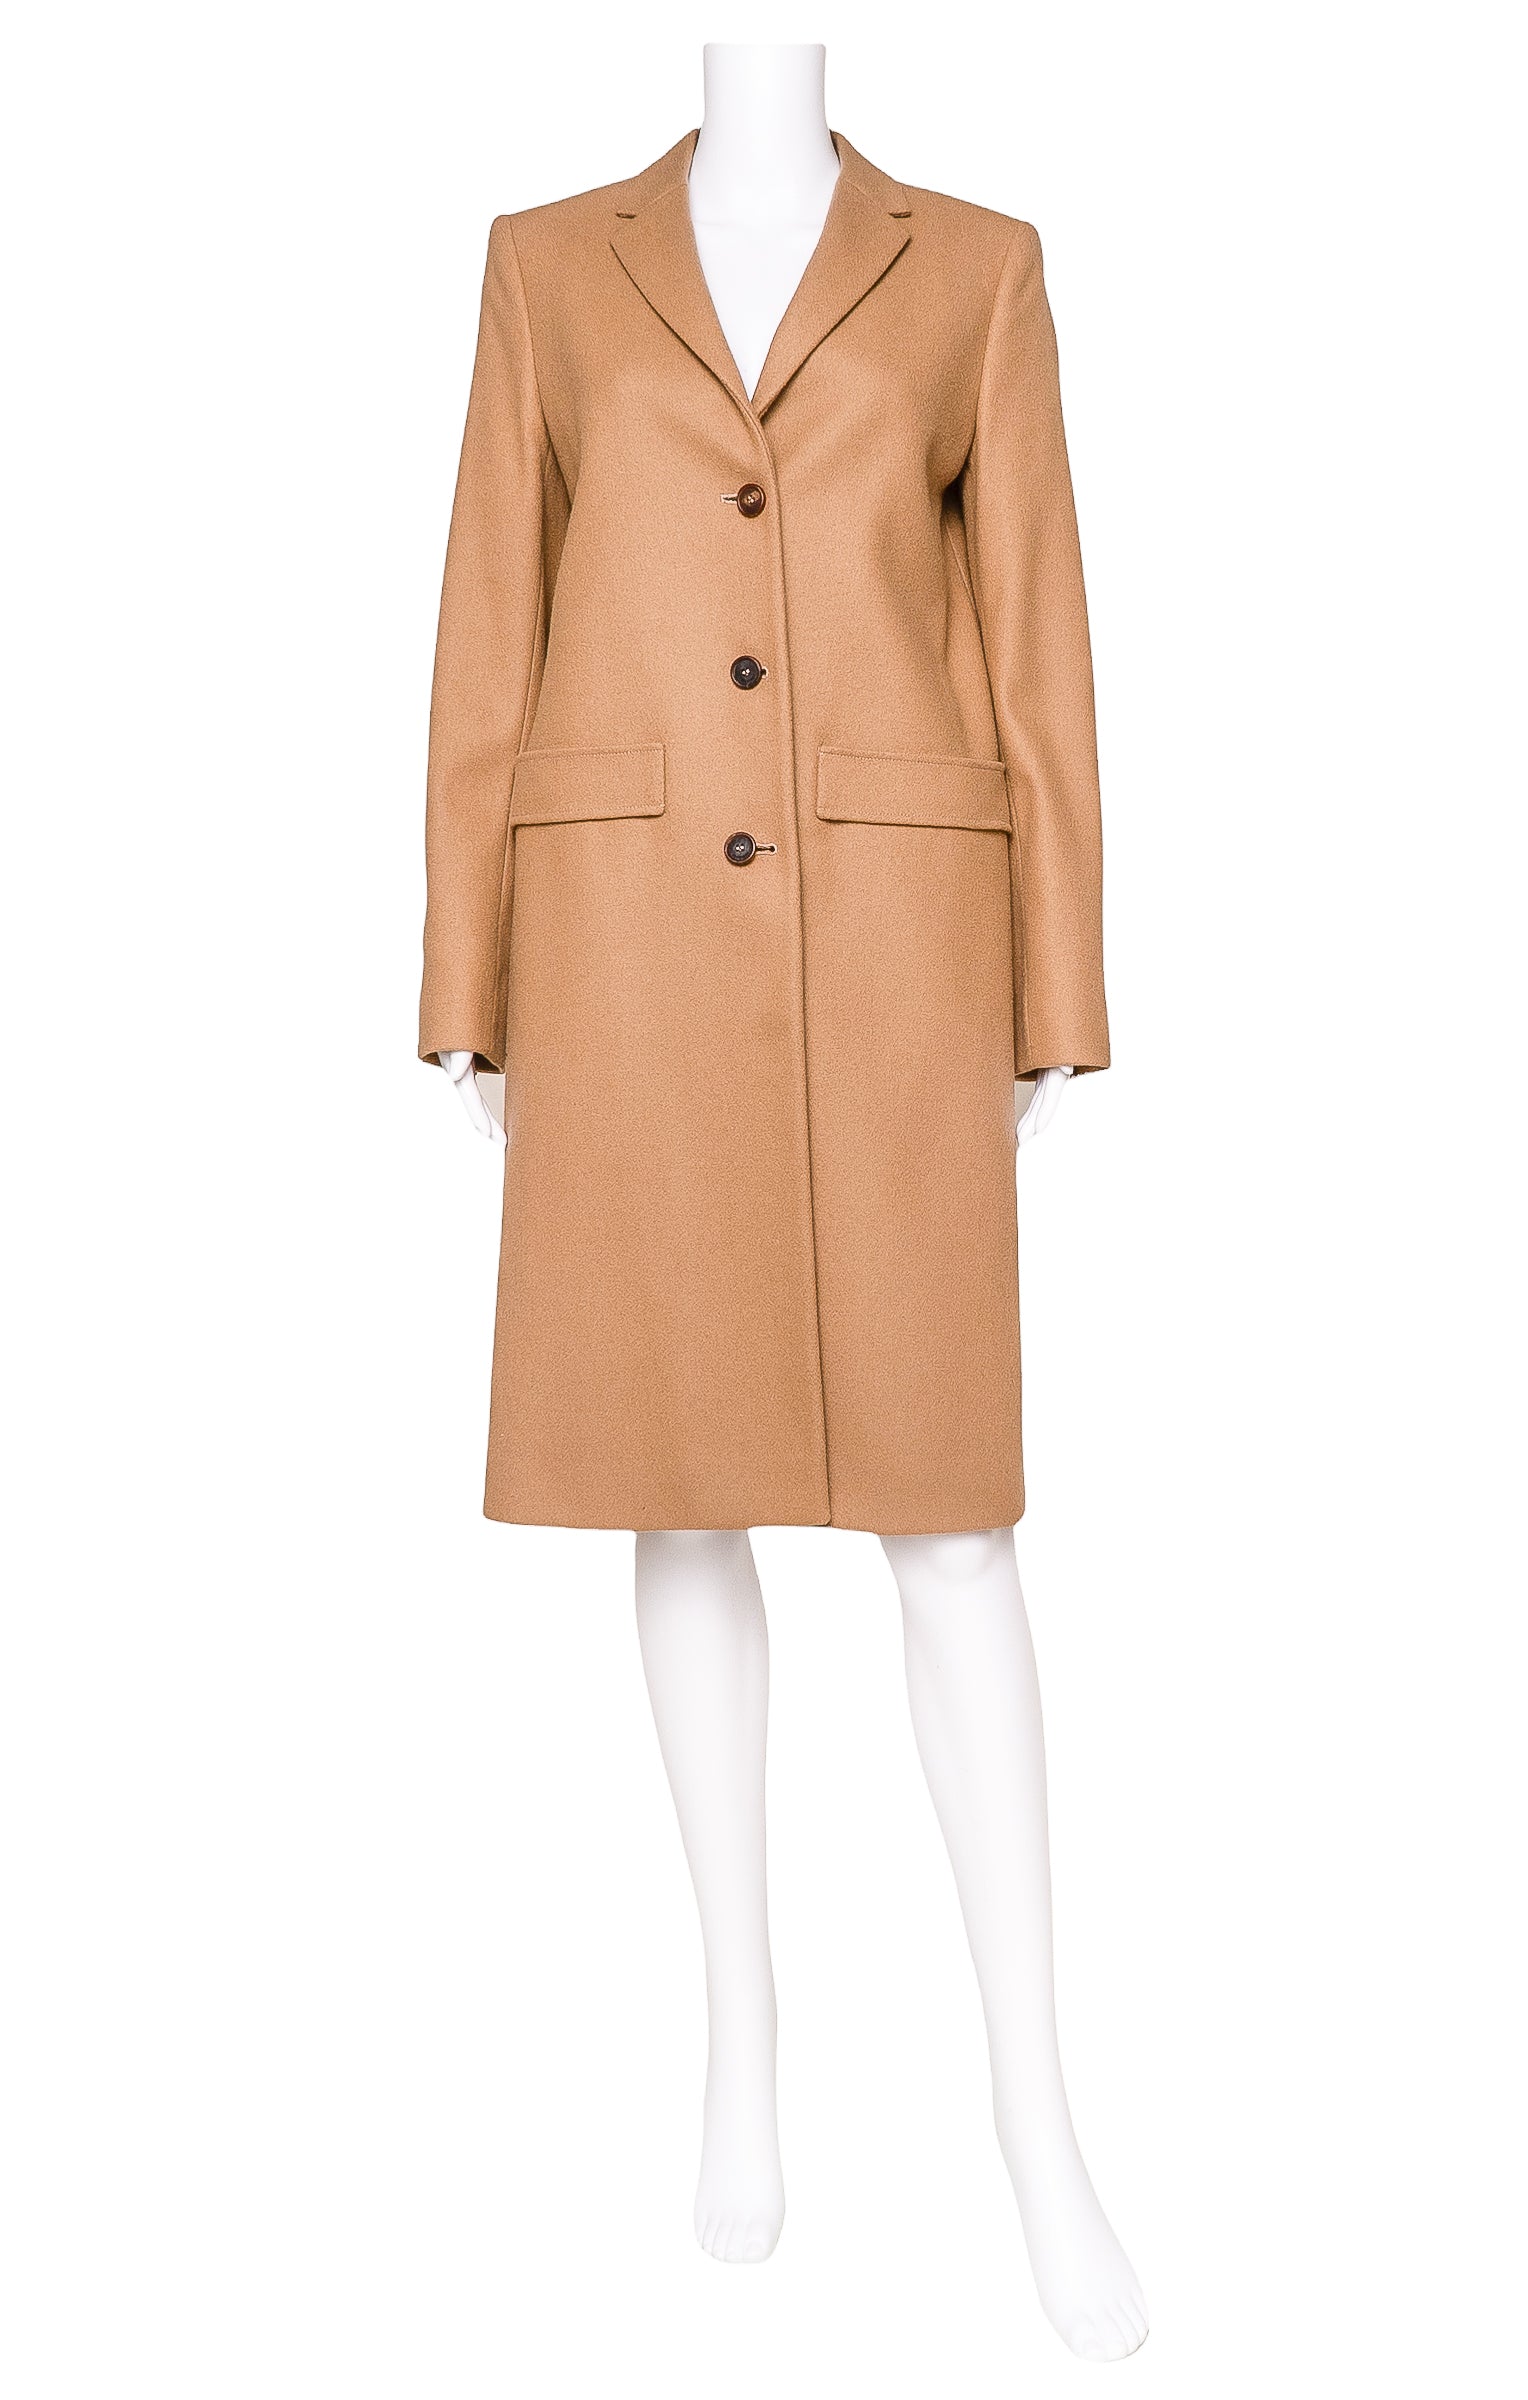 GIVENCHY Coat Size: IT 40 / Comparable to US 2-4